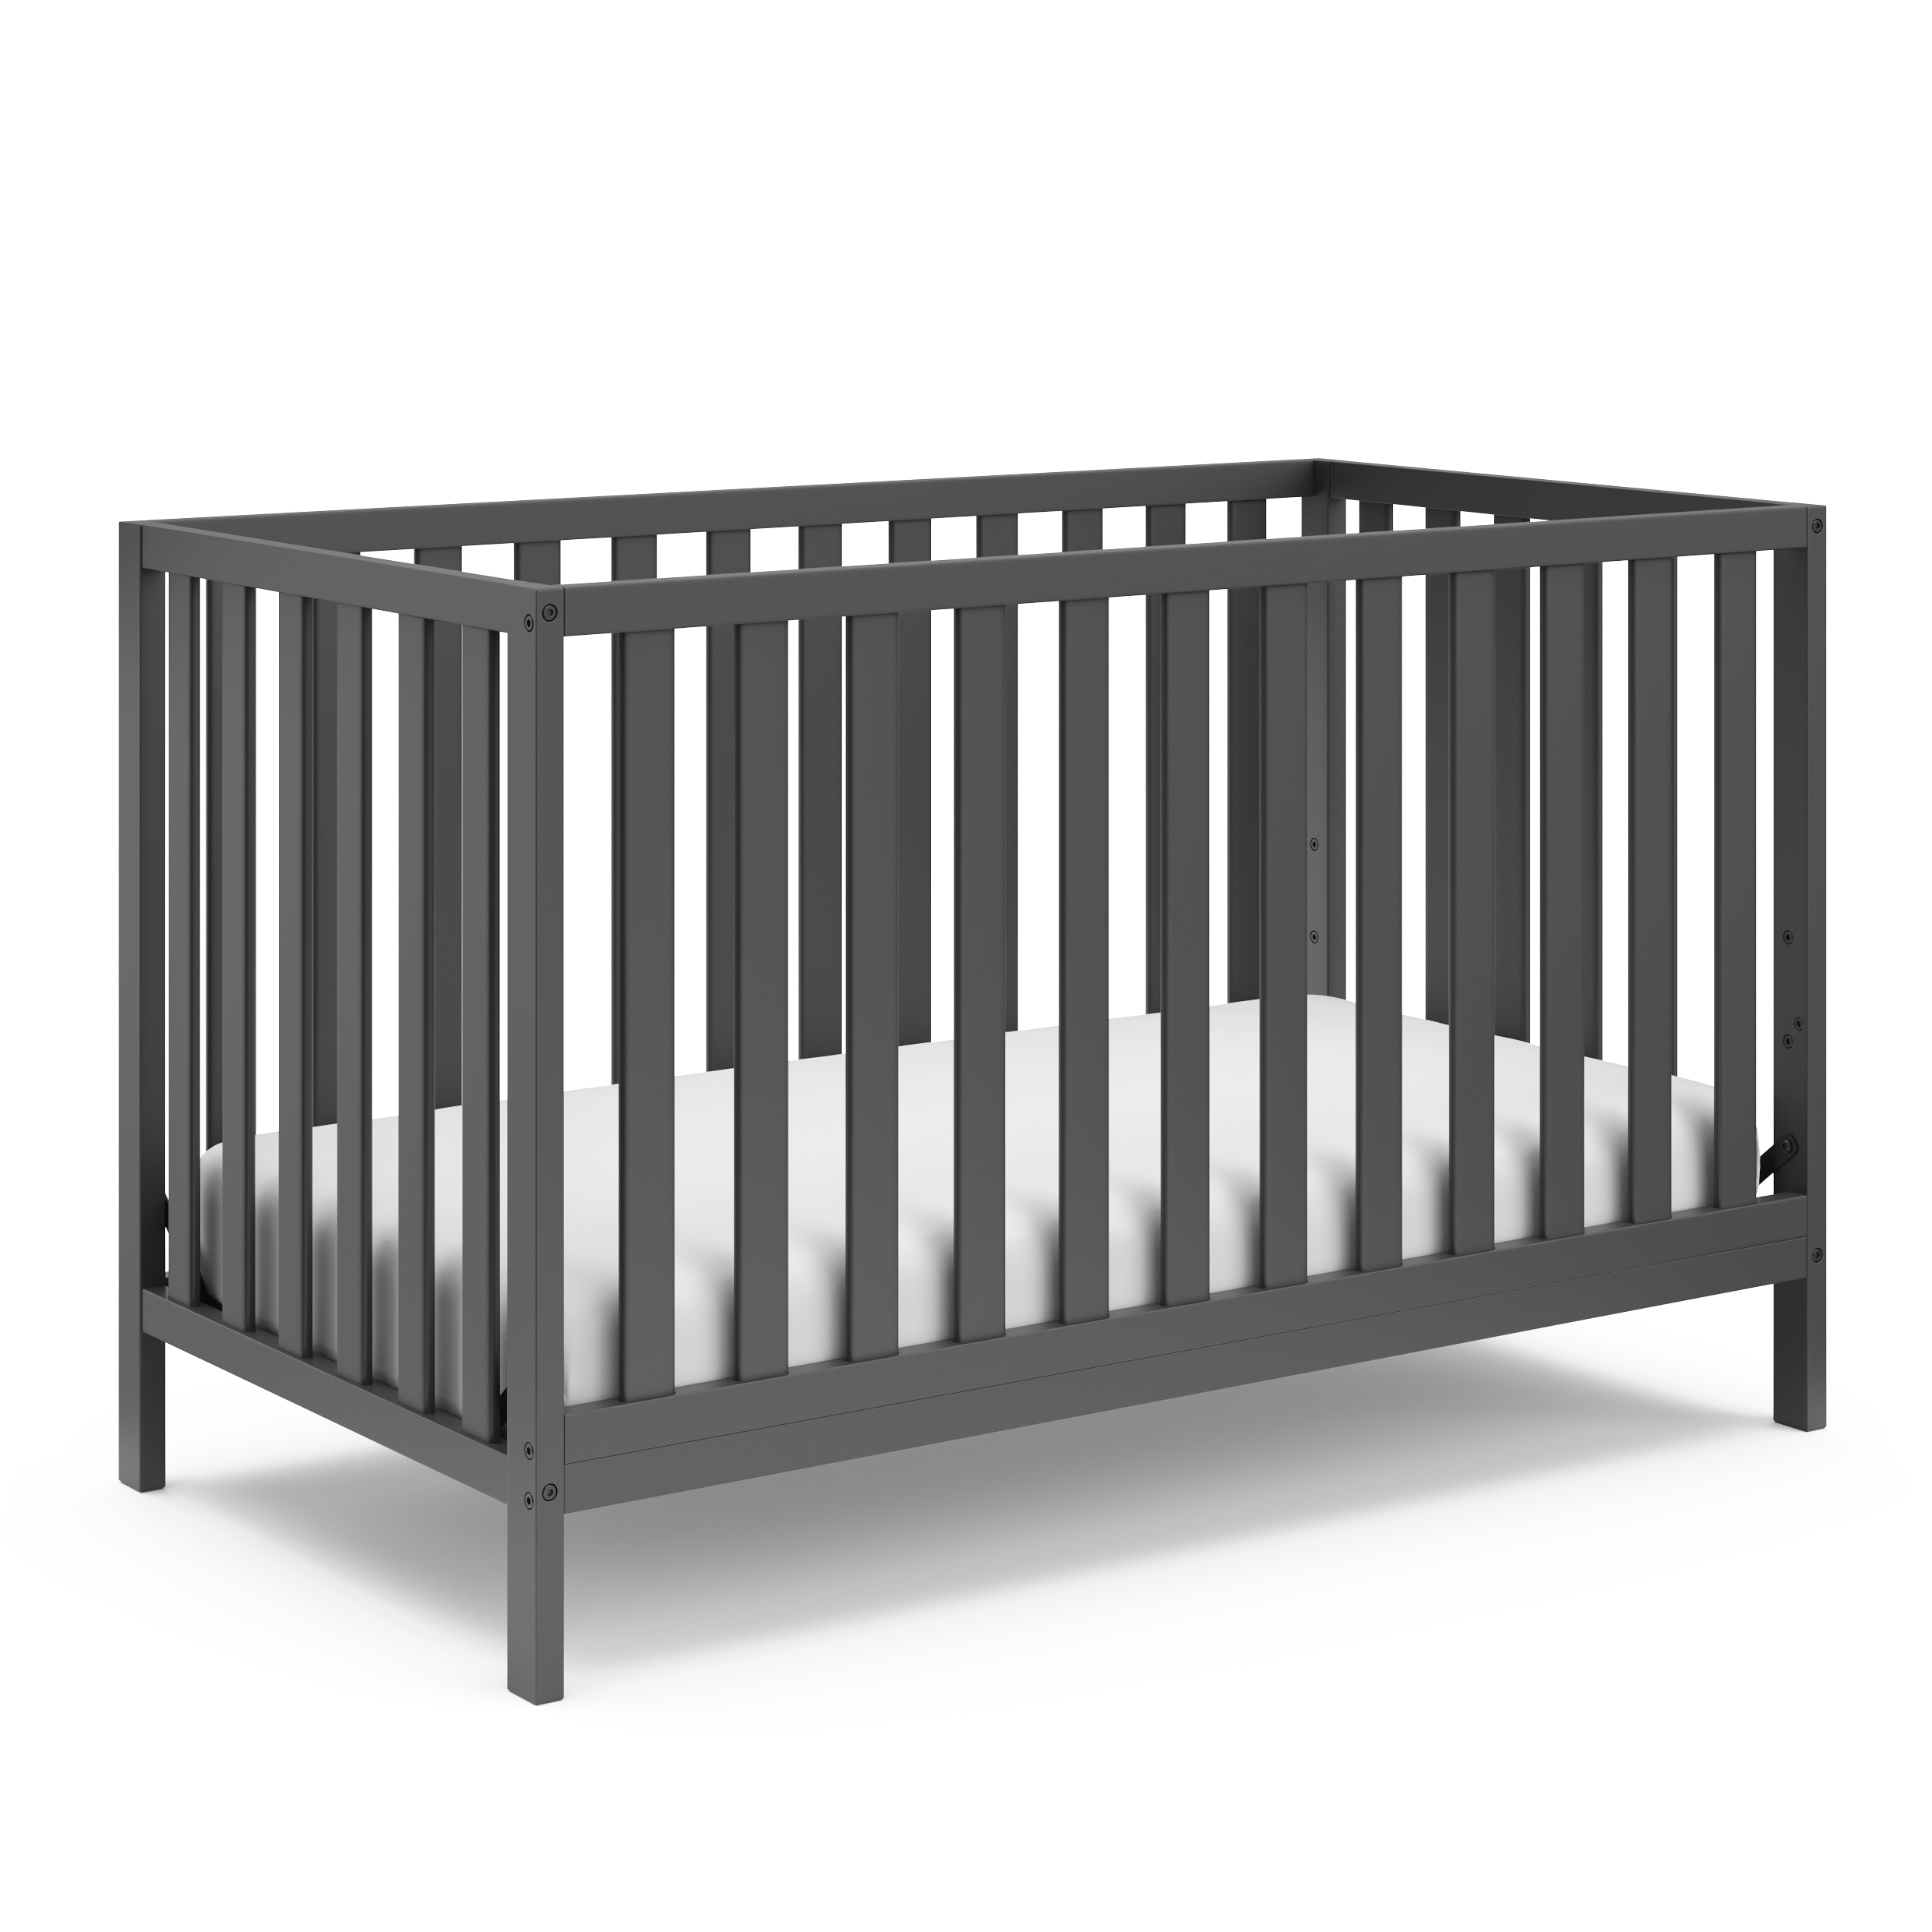 Storkcraft Sunset 4-in-1 Convertible Baby Crib, Gray - image 1 of 8